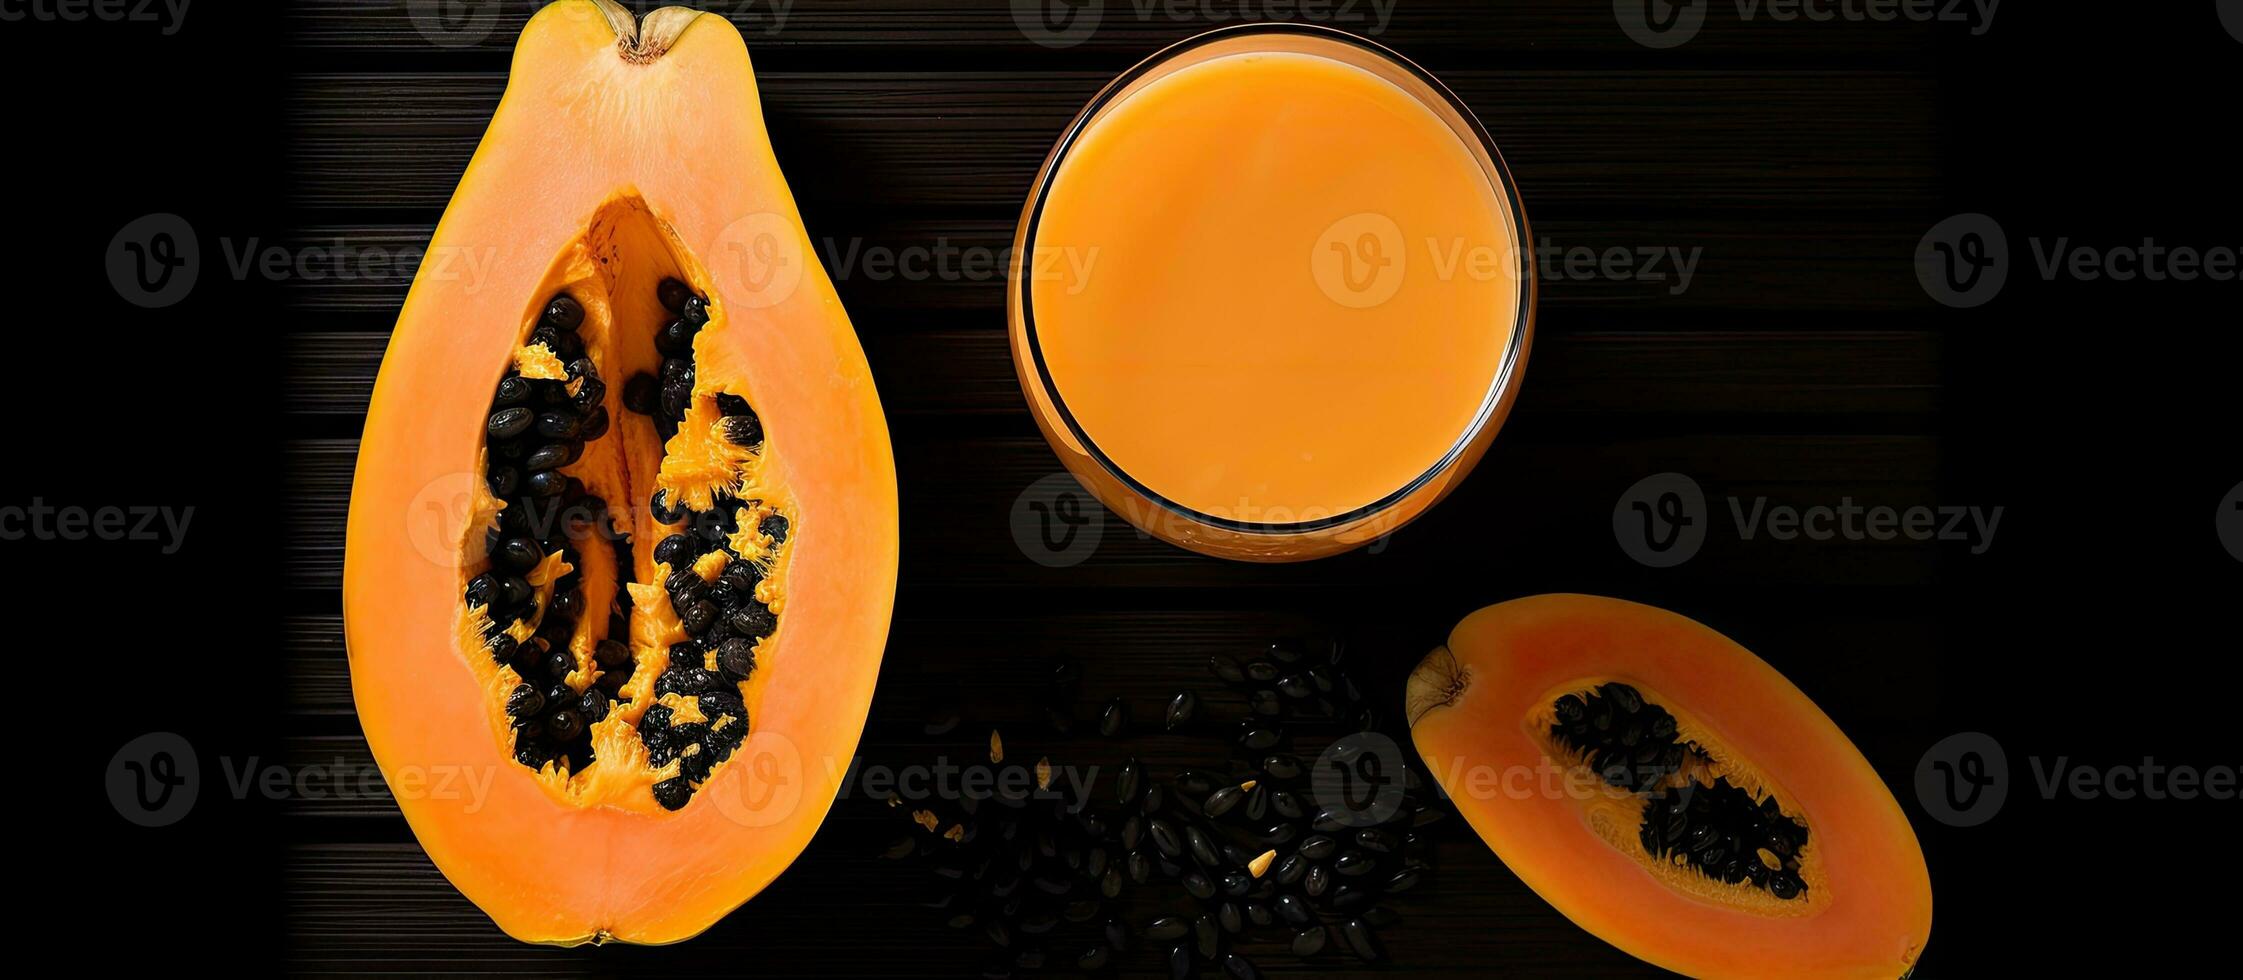 Photo of a halved papaya next to a refreshing glass of orange juice with copy space